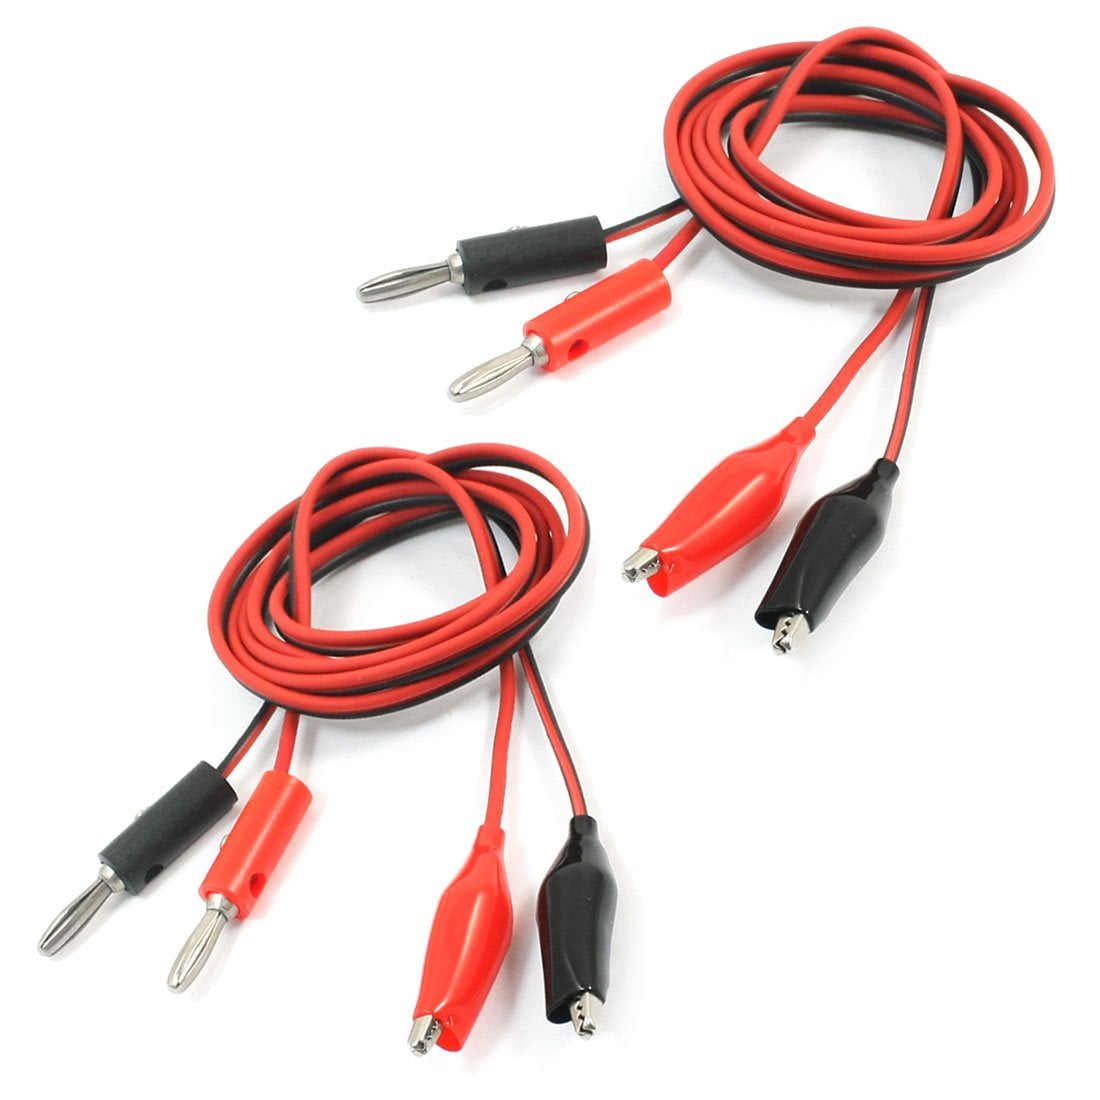 Alligator Clip to Banana Plug Test Cable Pair for Multimeter 1M Long HOT 